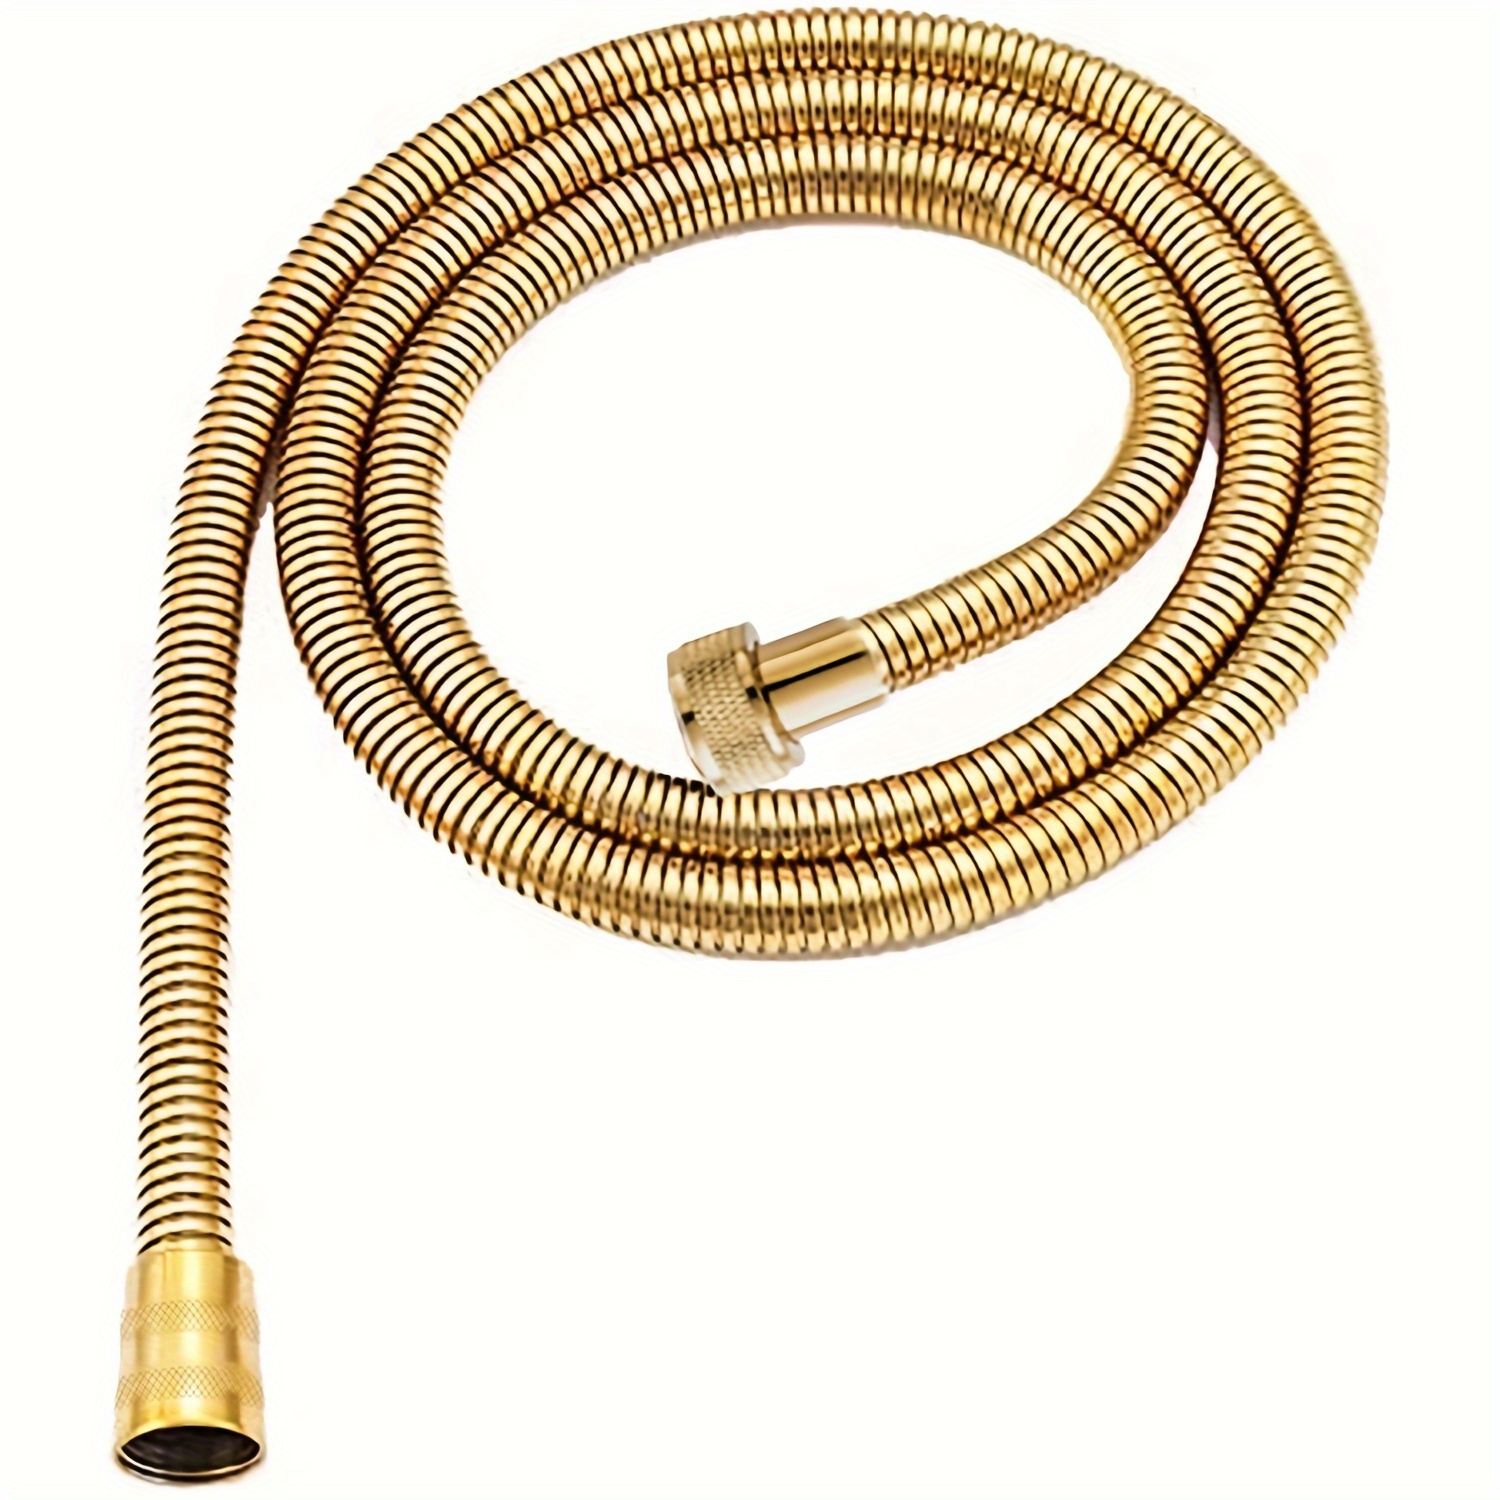 

1pc Golden Plated 1.5m Stainless Steel Shower Hose, European Antique Style Flexible Handheld Shower Hose, Explosion-proof Rain Shower Head Pipe, Electroplated Metal Hose, Bathroom Accessories